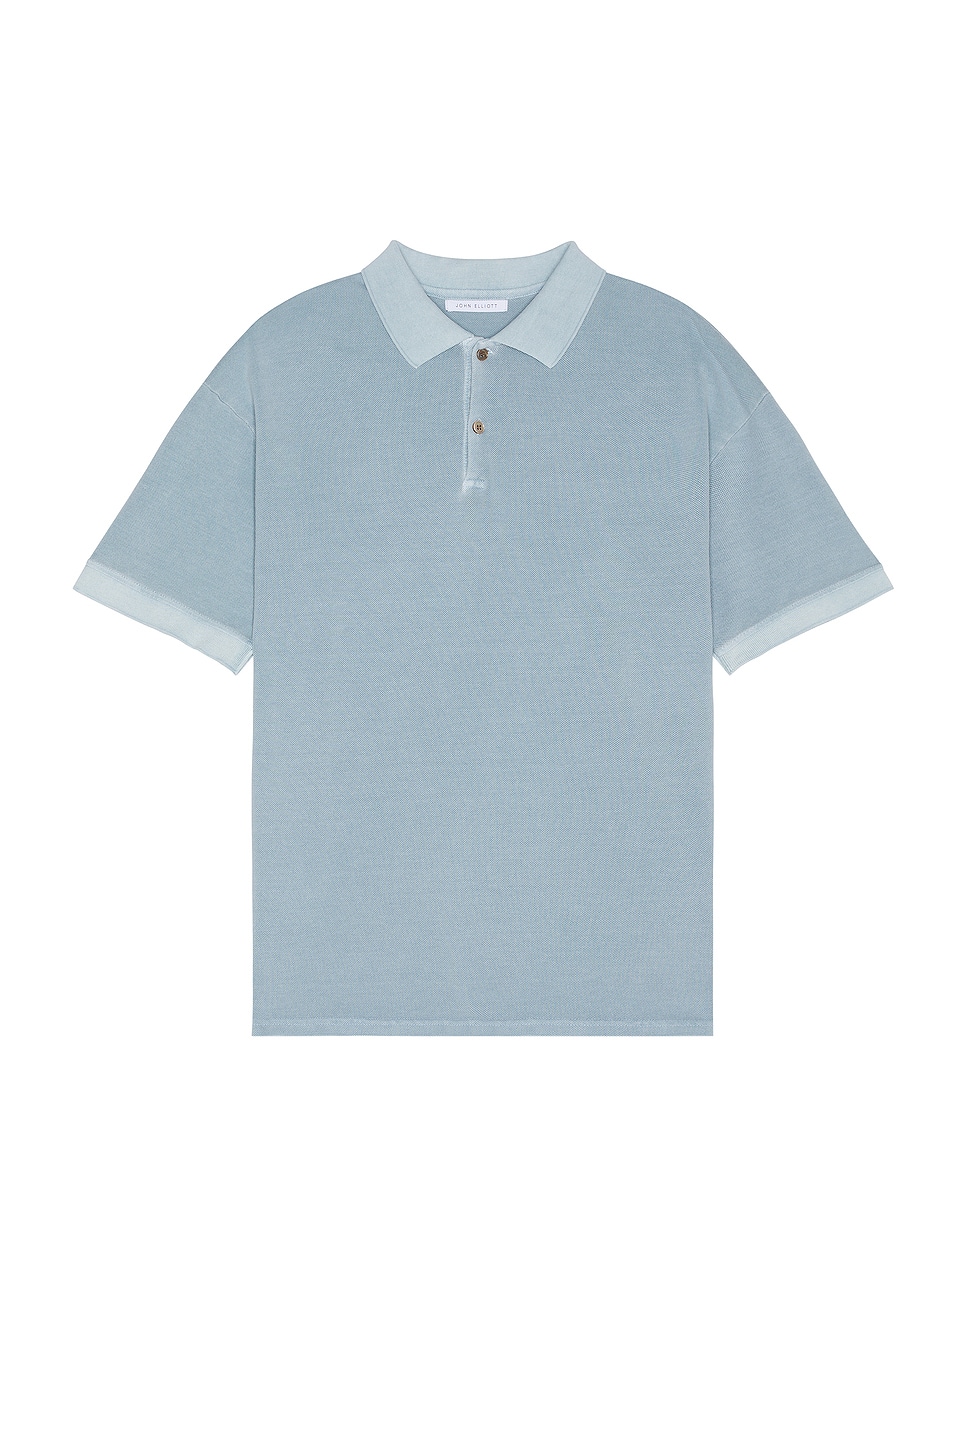 Image 1 of JOHN ELLIOTT Dinghy Polo in Washed Sky